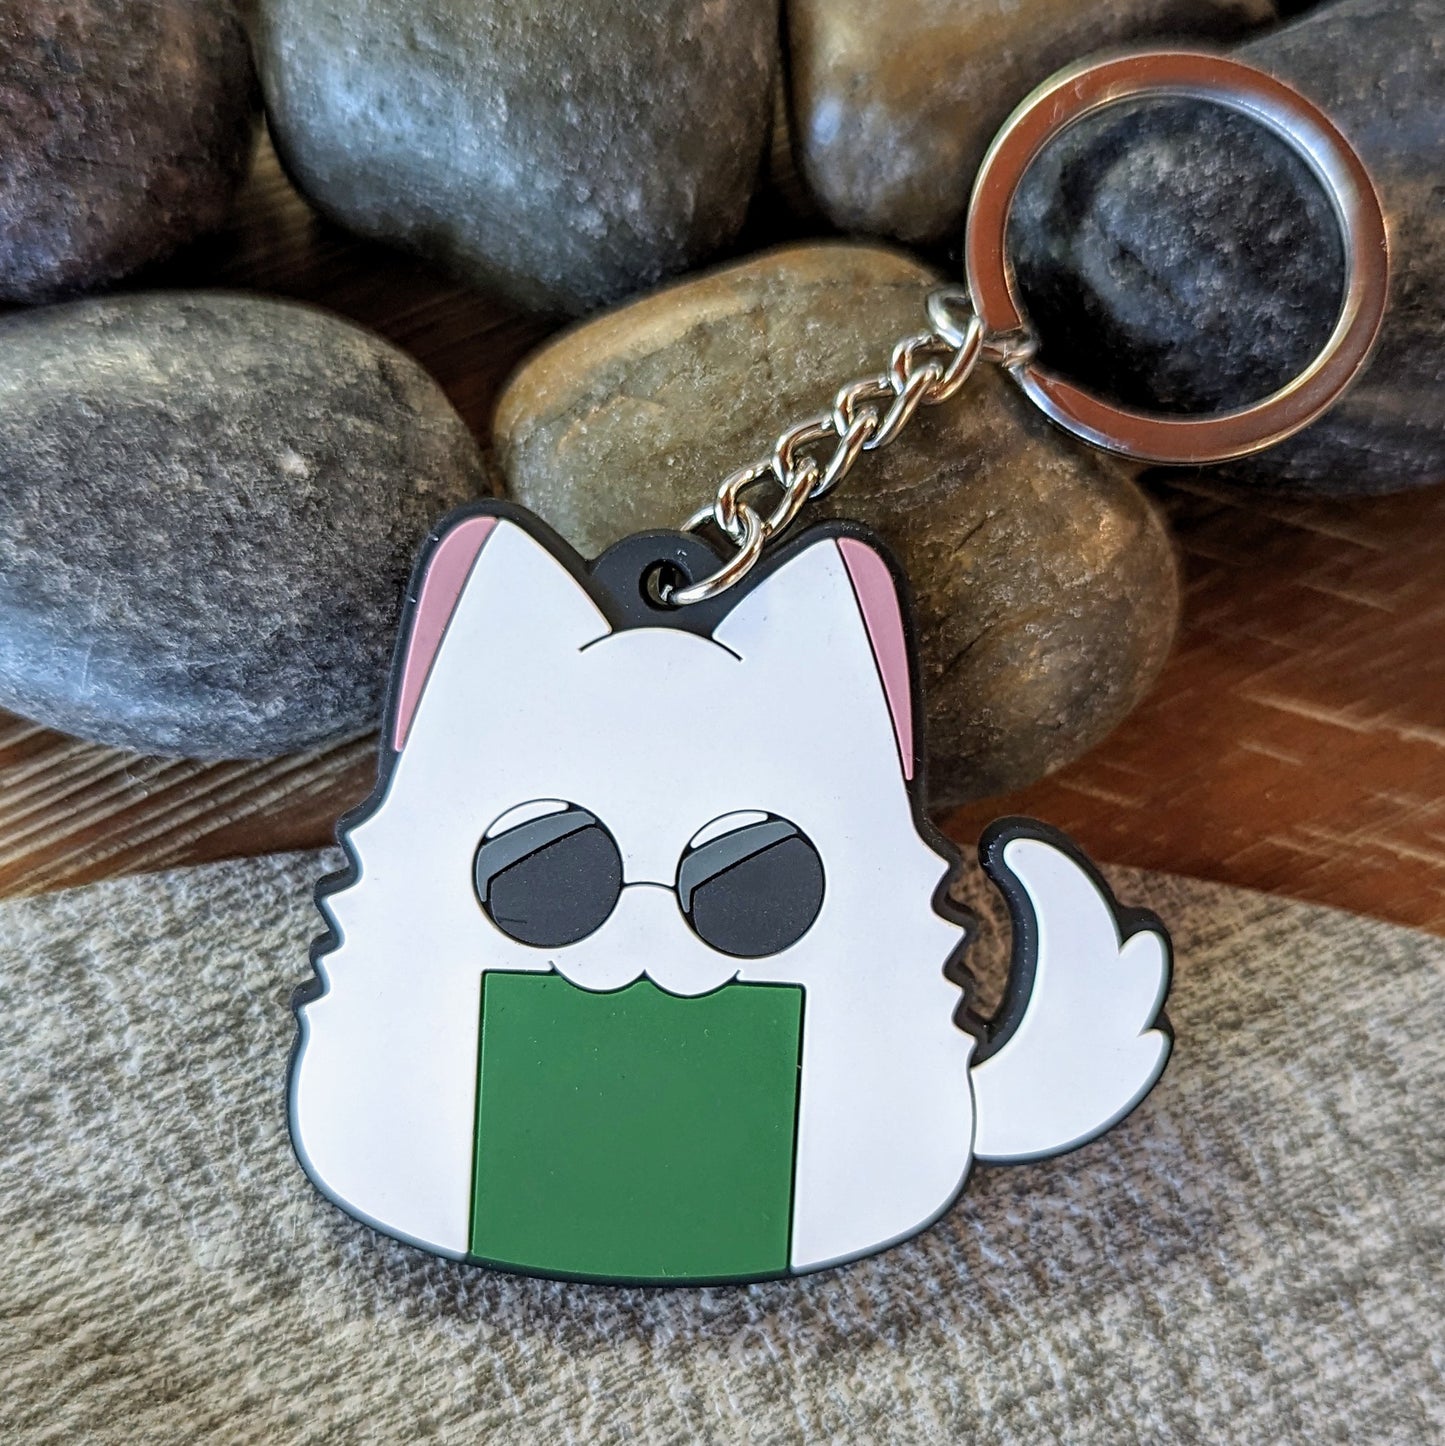 PVC Keychains / Charms (multiple designs)